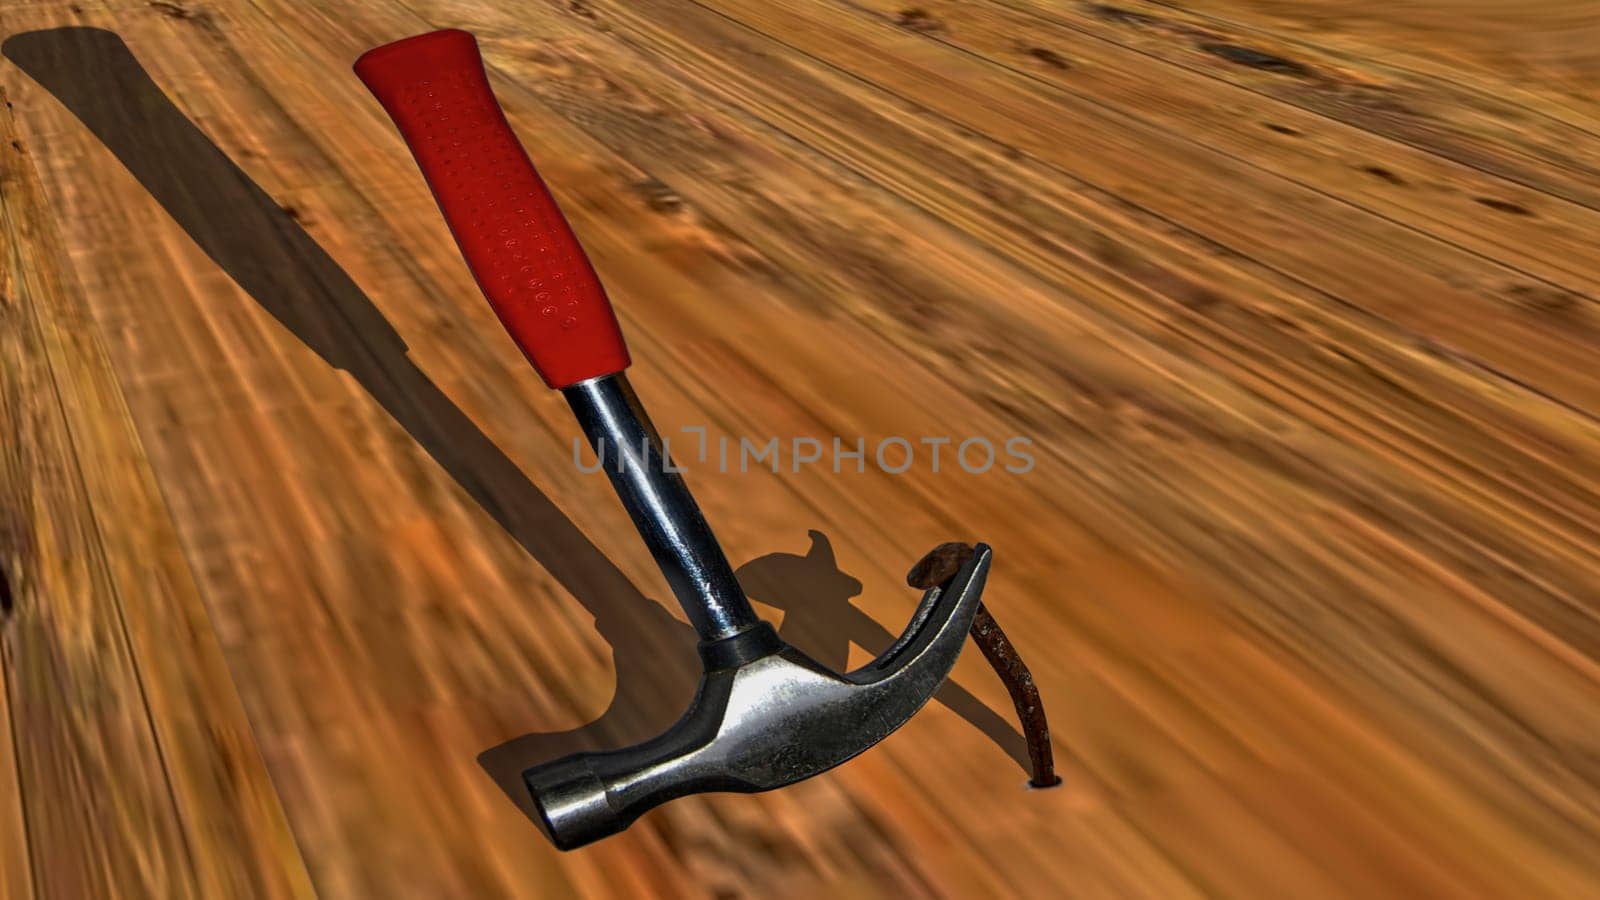 Hammer with nail puller on wooden floor. Hand tool.